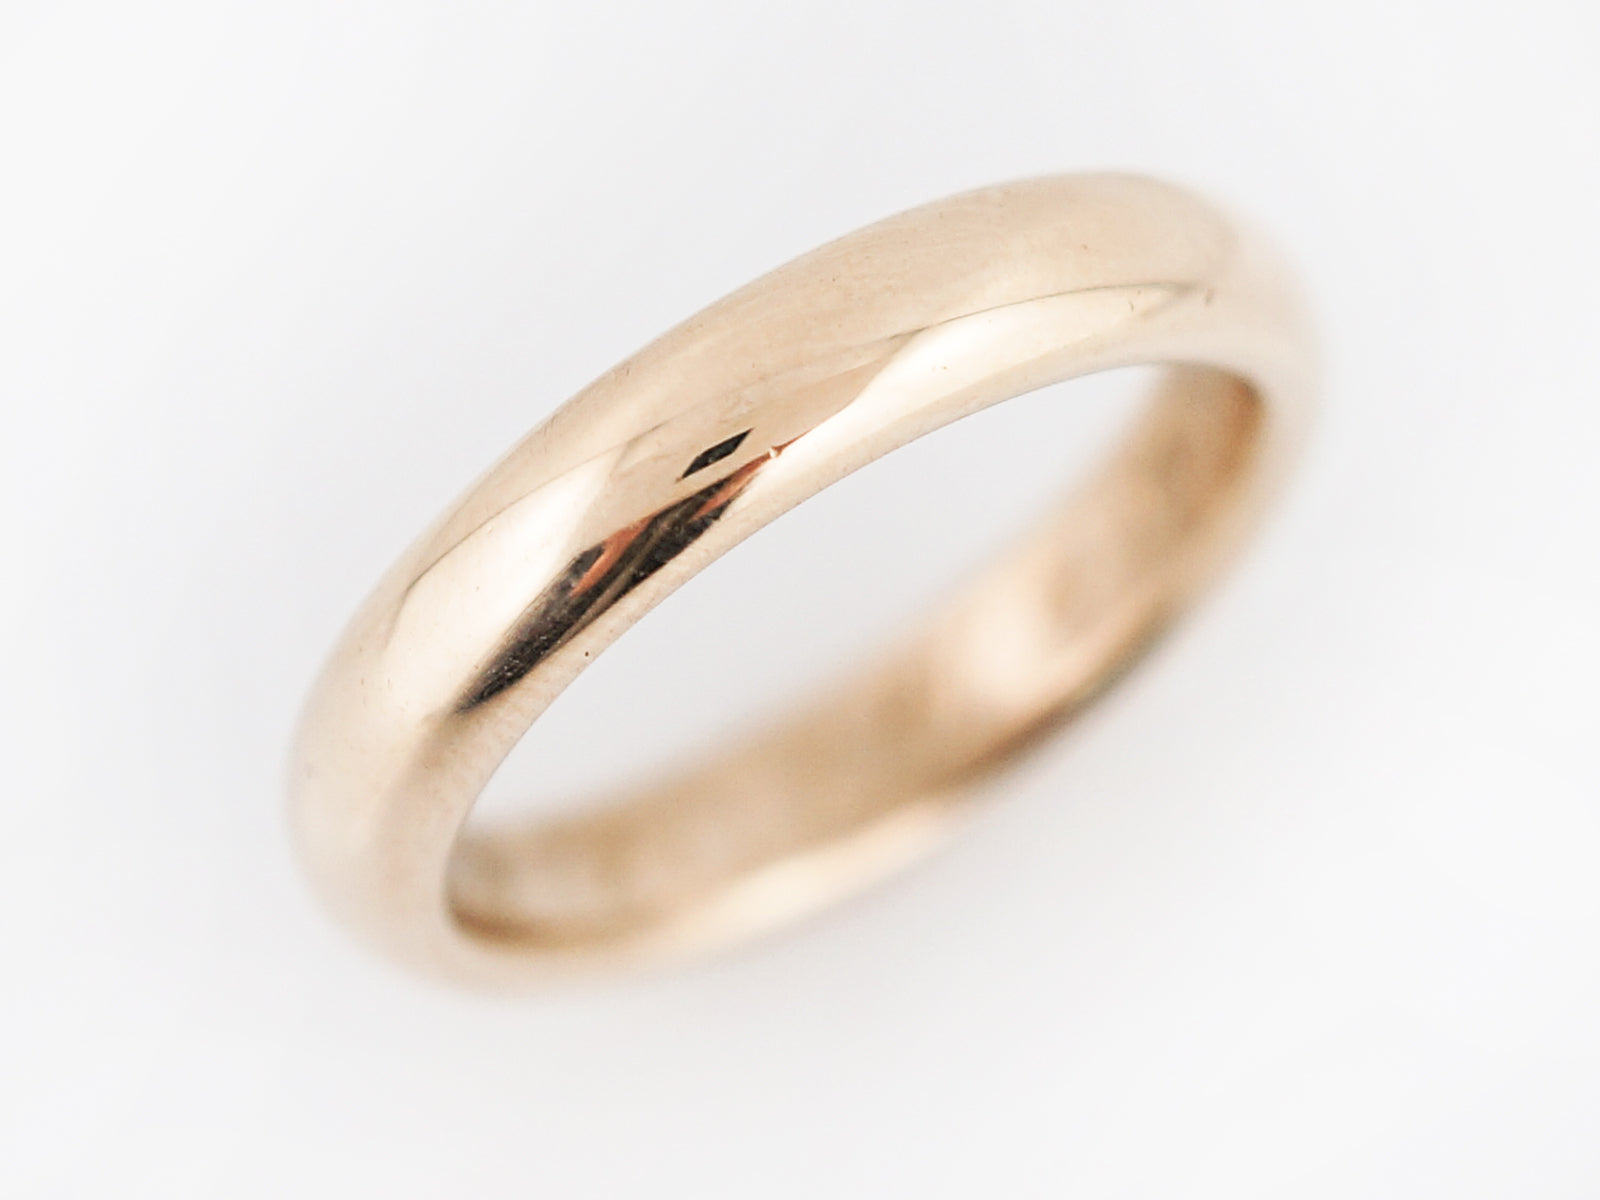 Antique Wedding Band Art Deco in 14k Yellow Gold